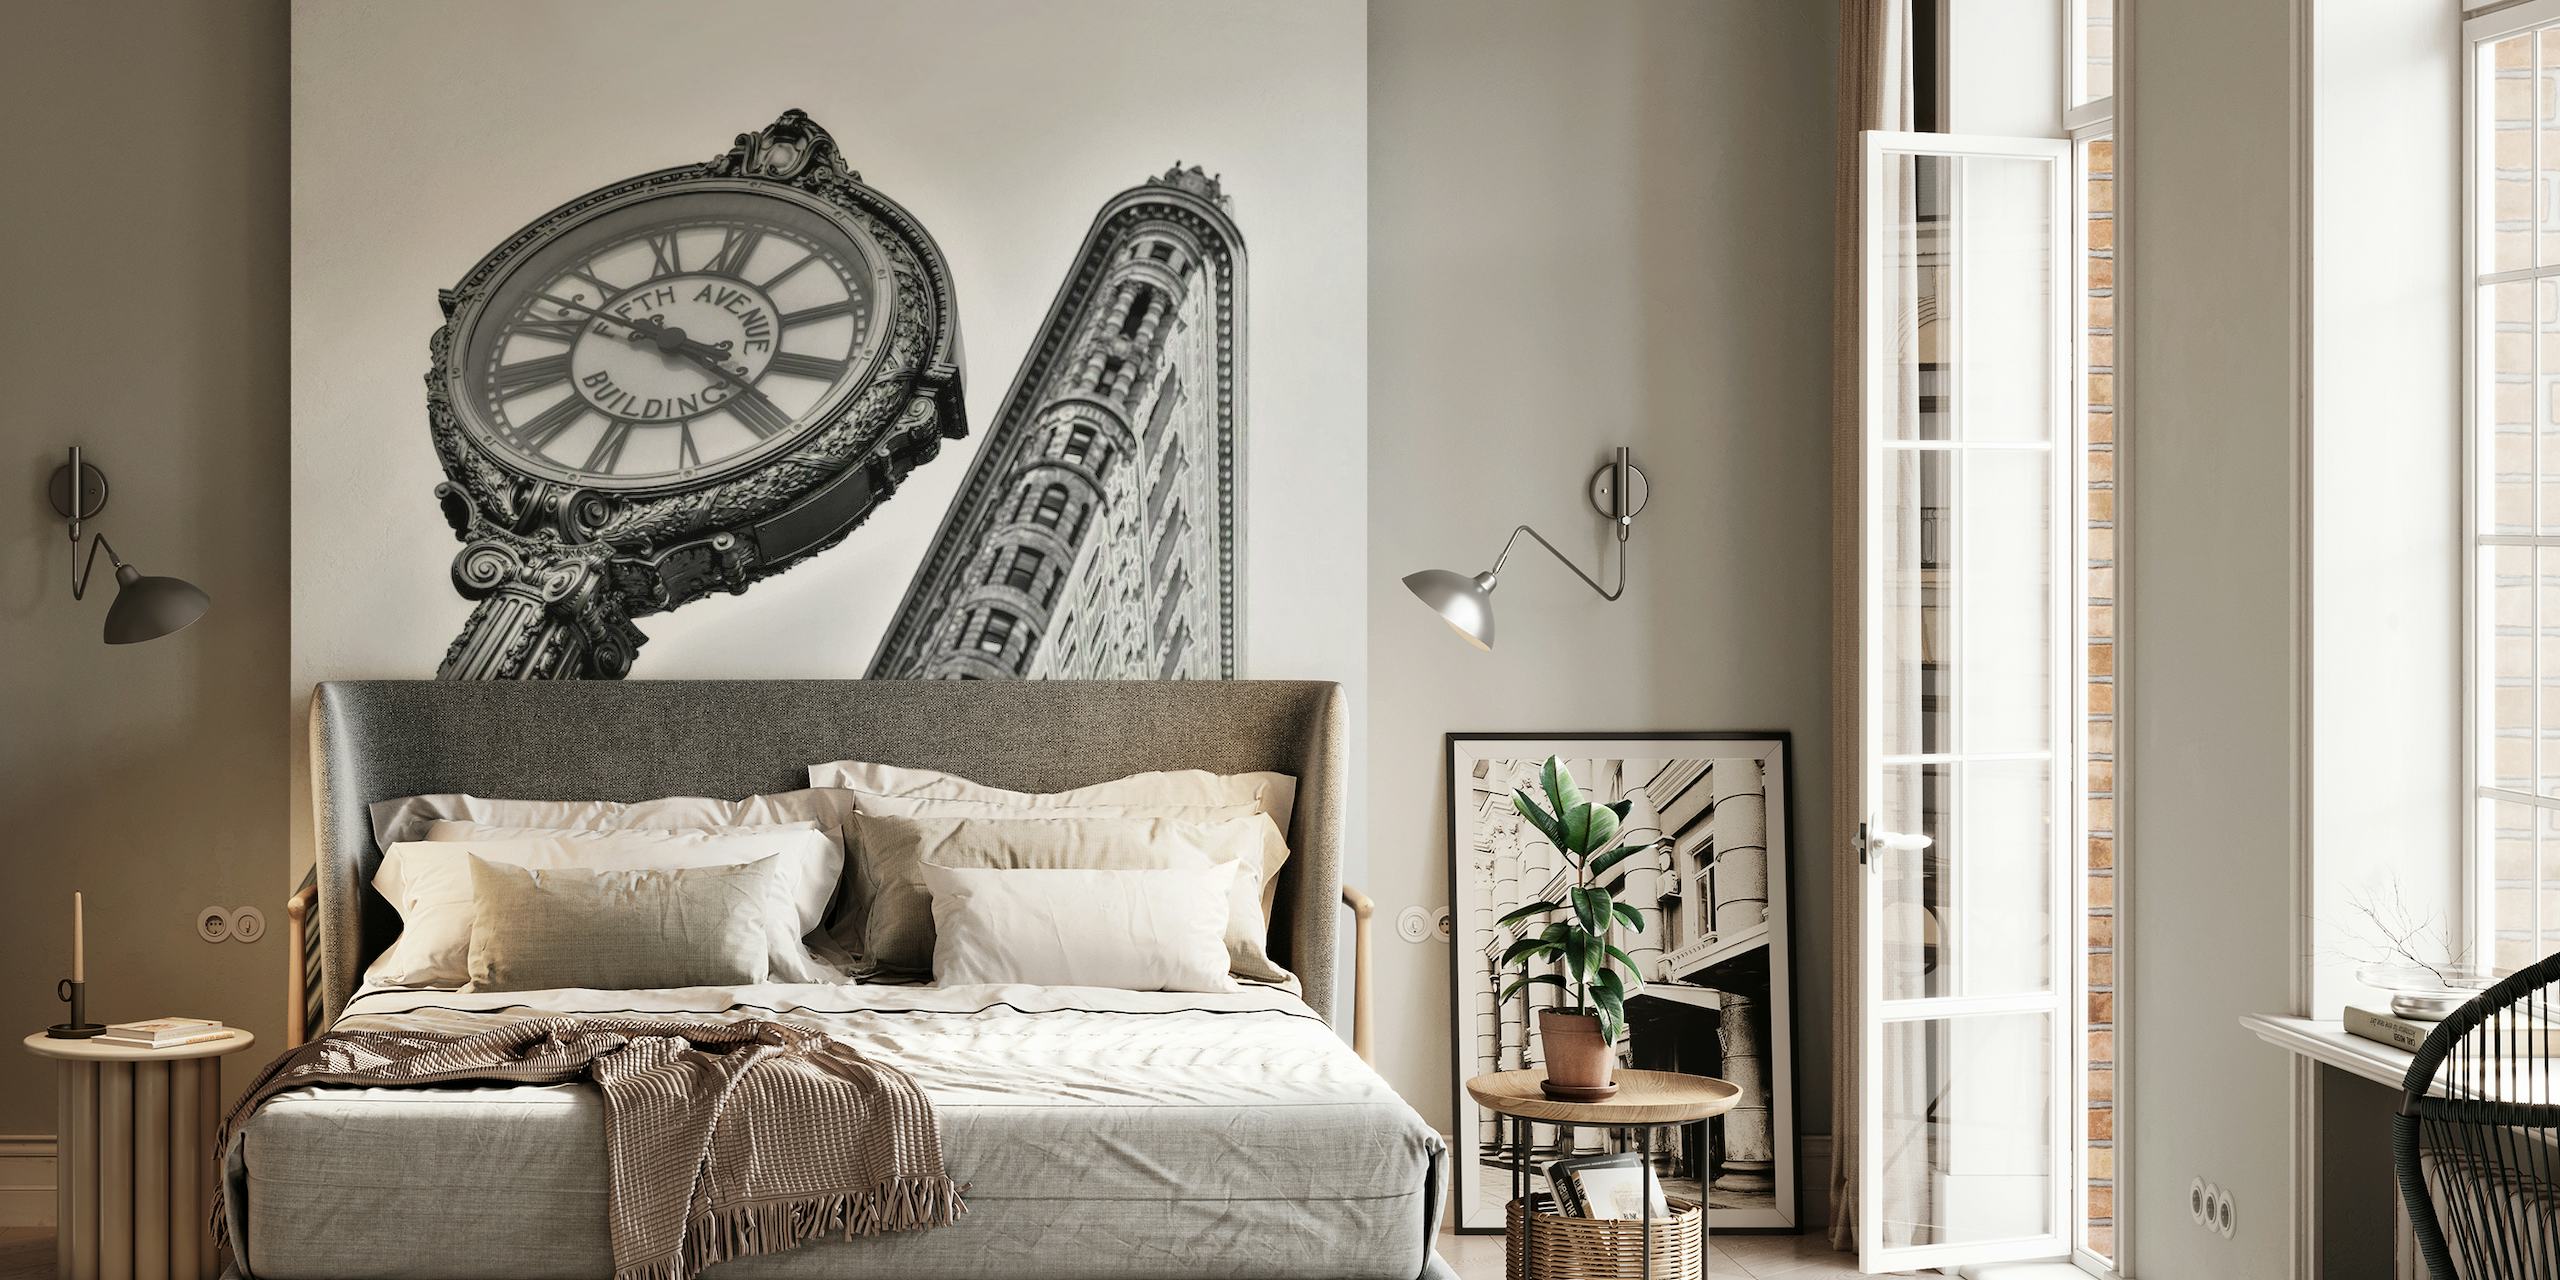 Black and white wall mural featuring a Manhattan skyscraper and a classic street clock, evoking New York's timeless elegance.